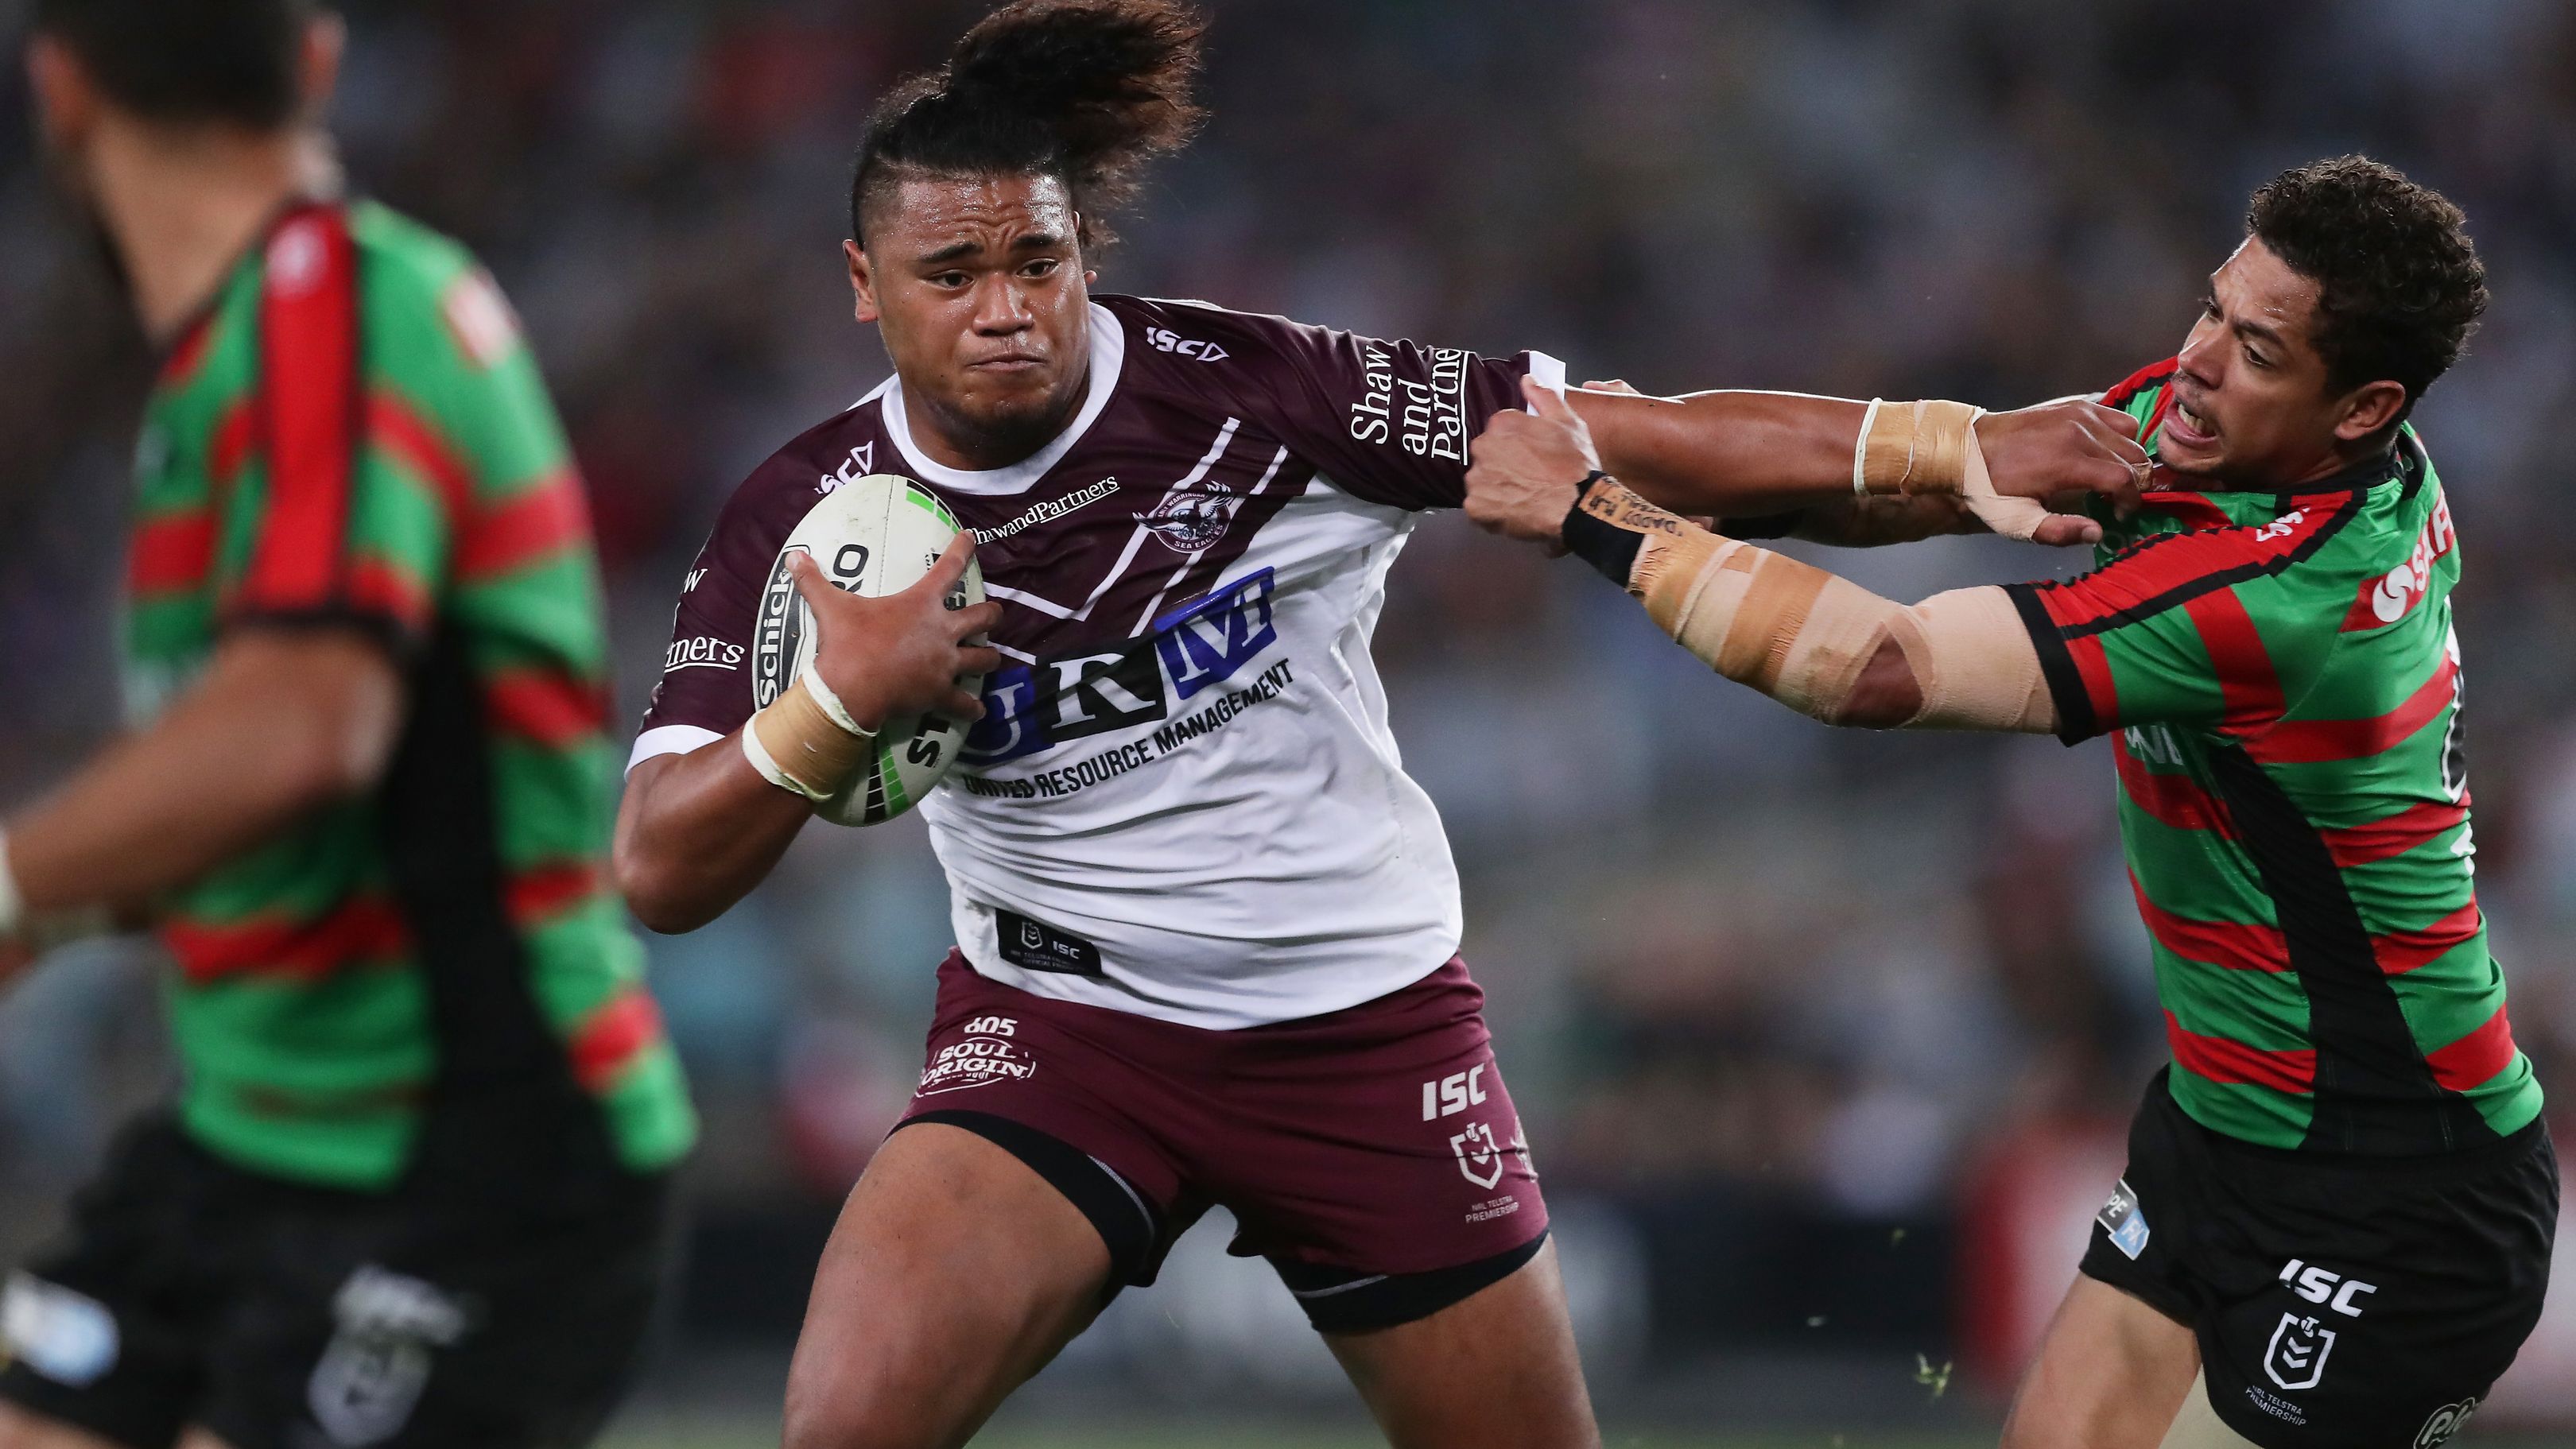 Manly race maligned star in after injury chaos